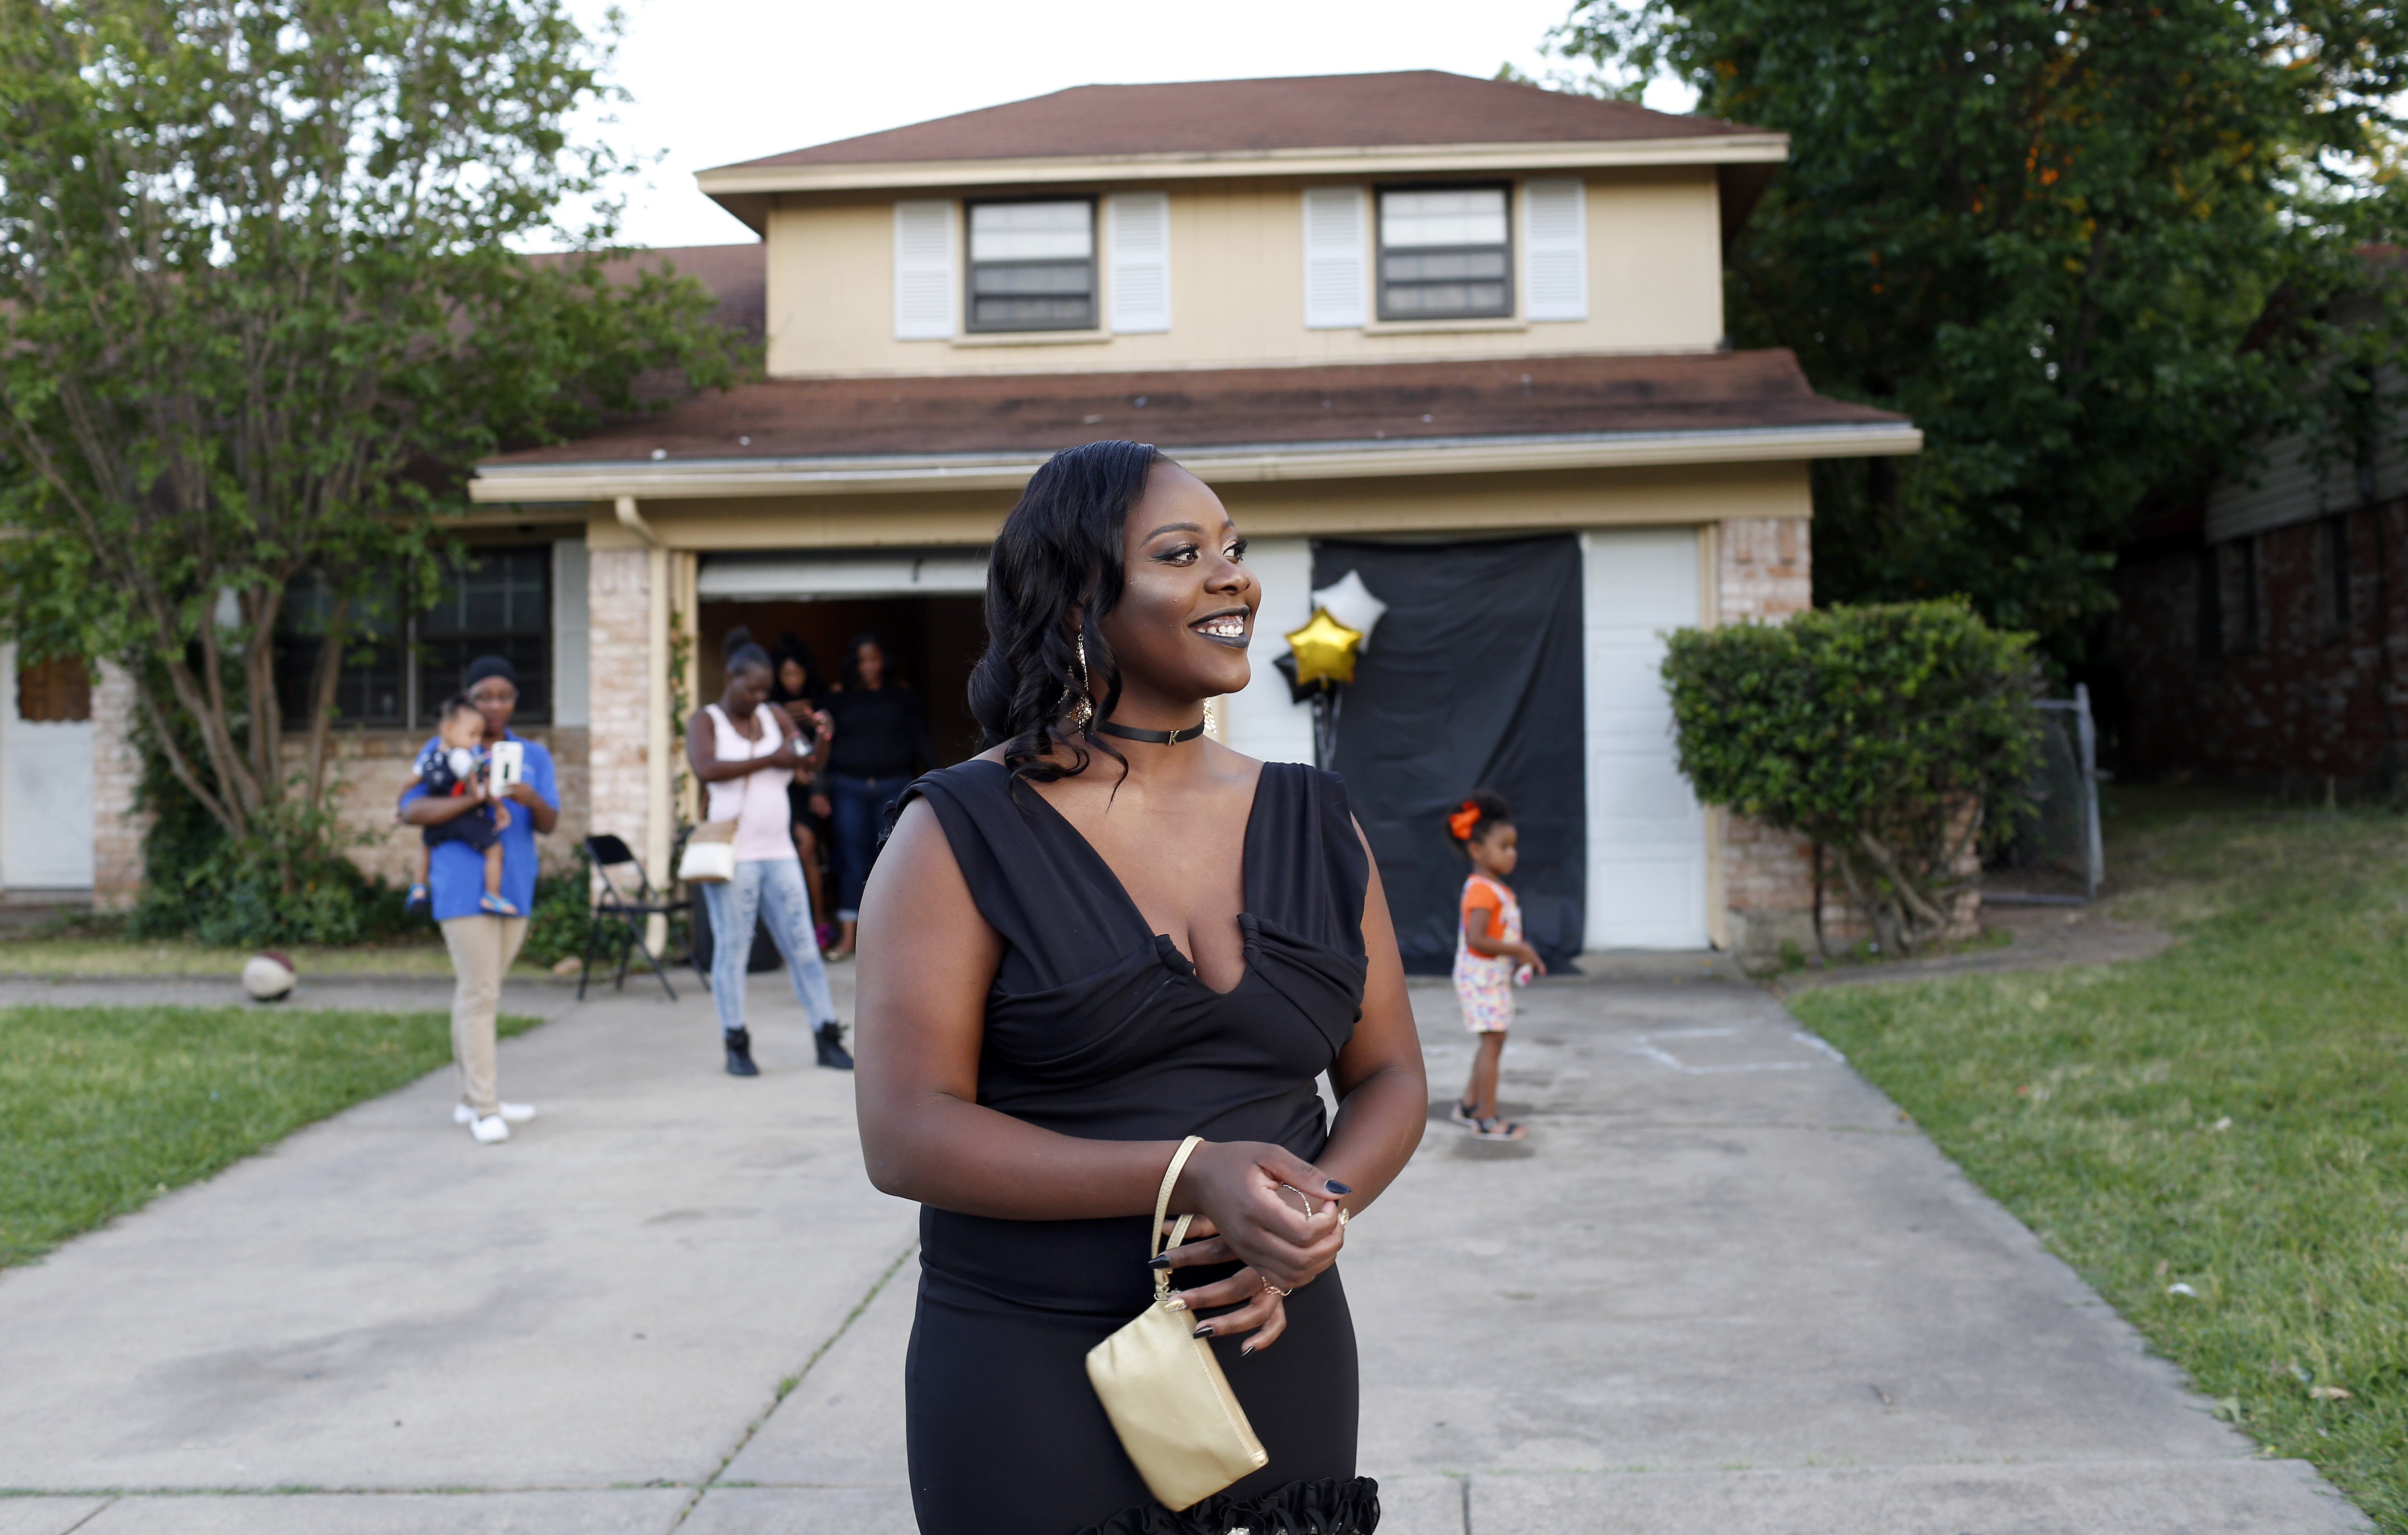 Kelli Bowdy waits for the car to pull up before leaving for prom. Photo/Lara Solt